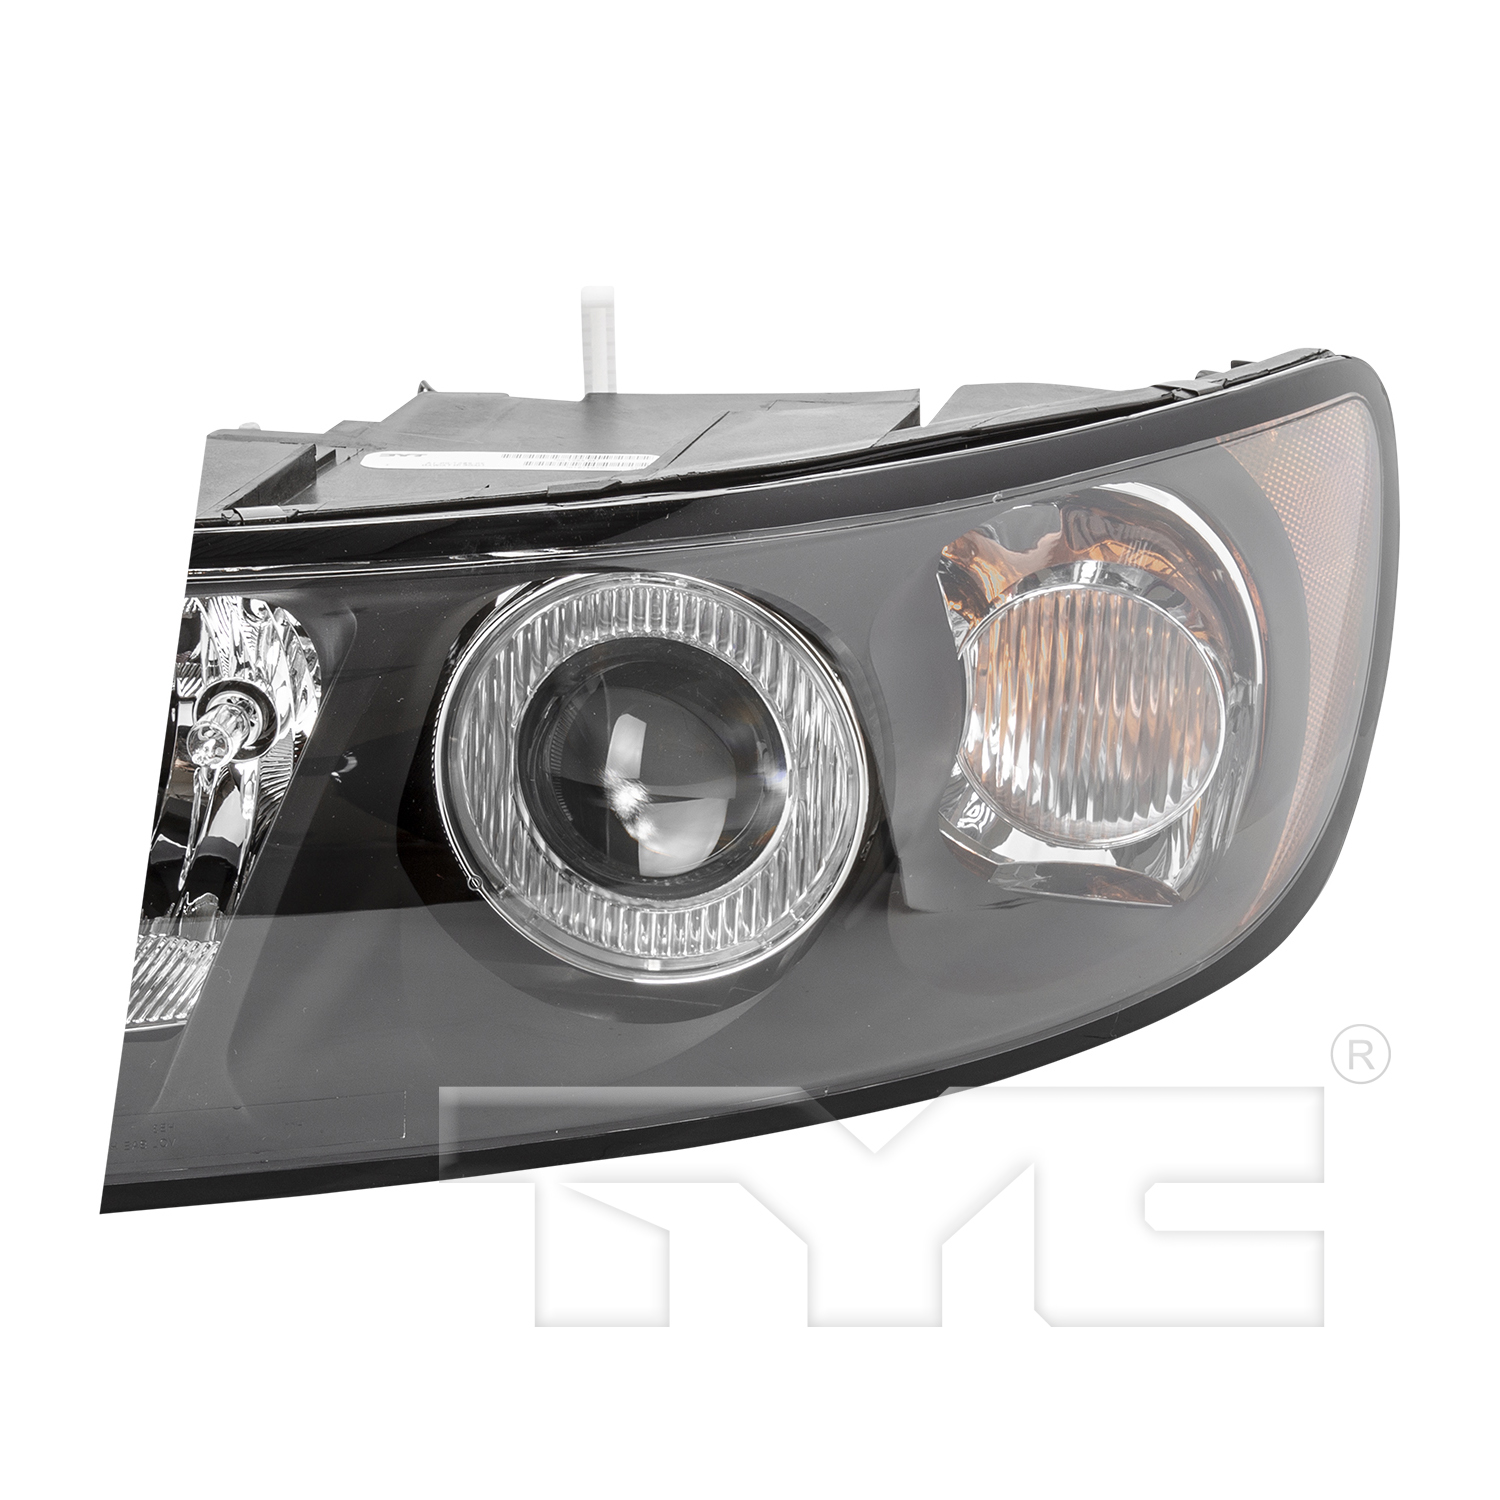 Aftermarket HEADLIGHTS for VOLVO - S40, S40,04-07,LT Headlamp assy composite